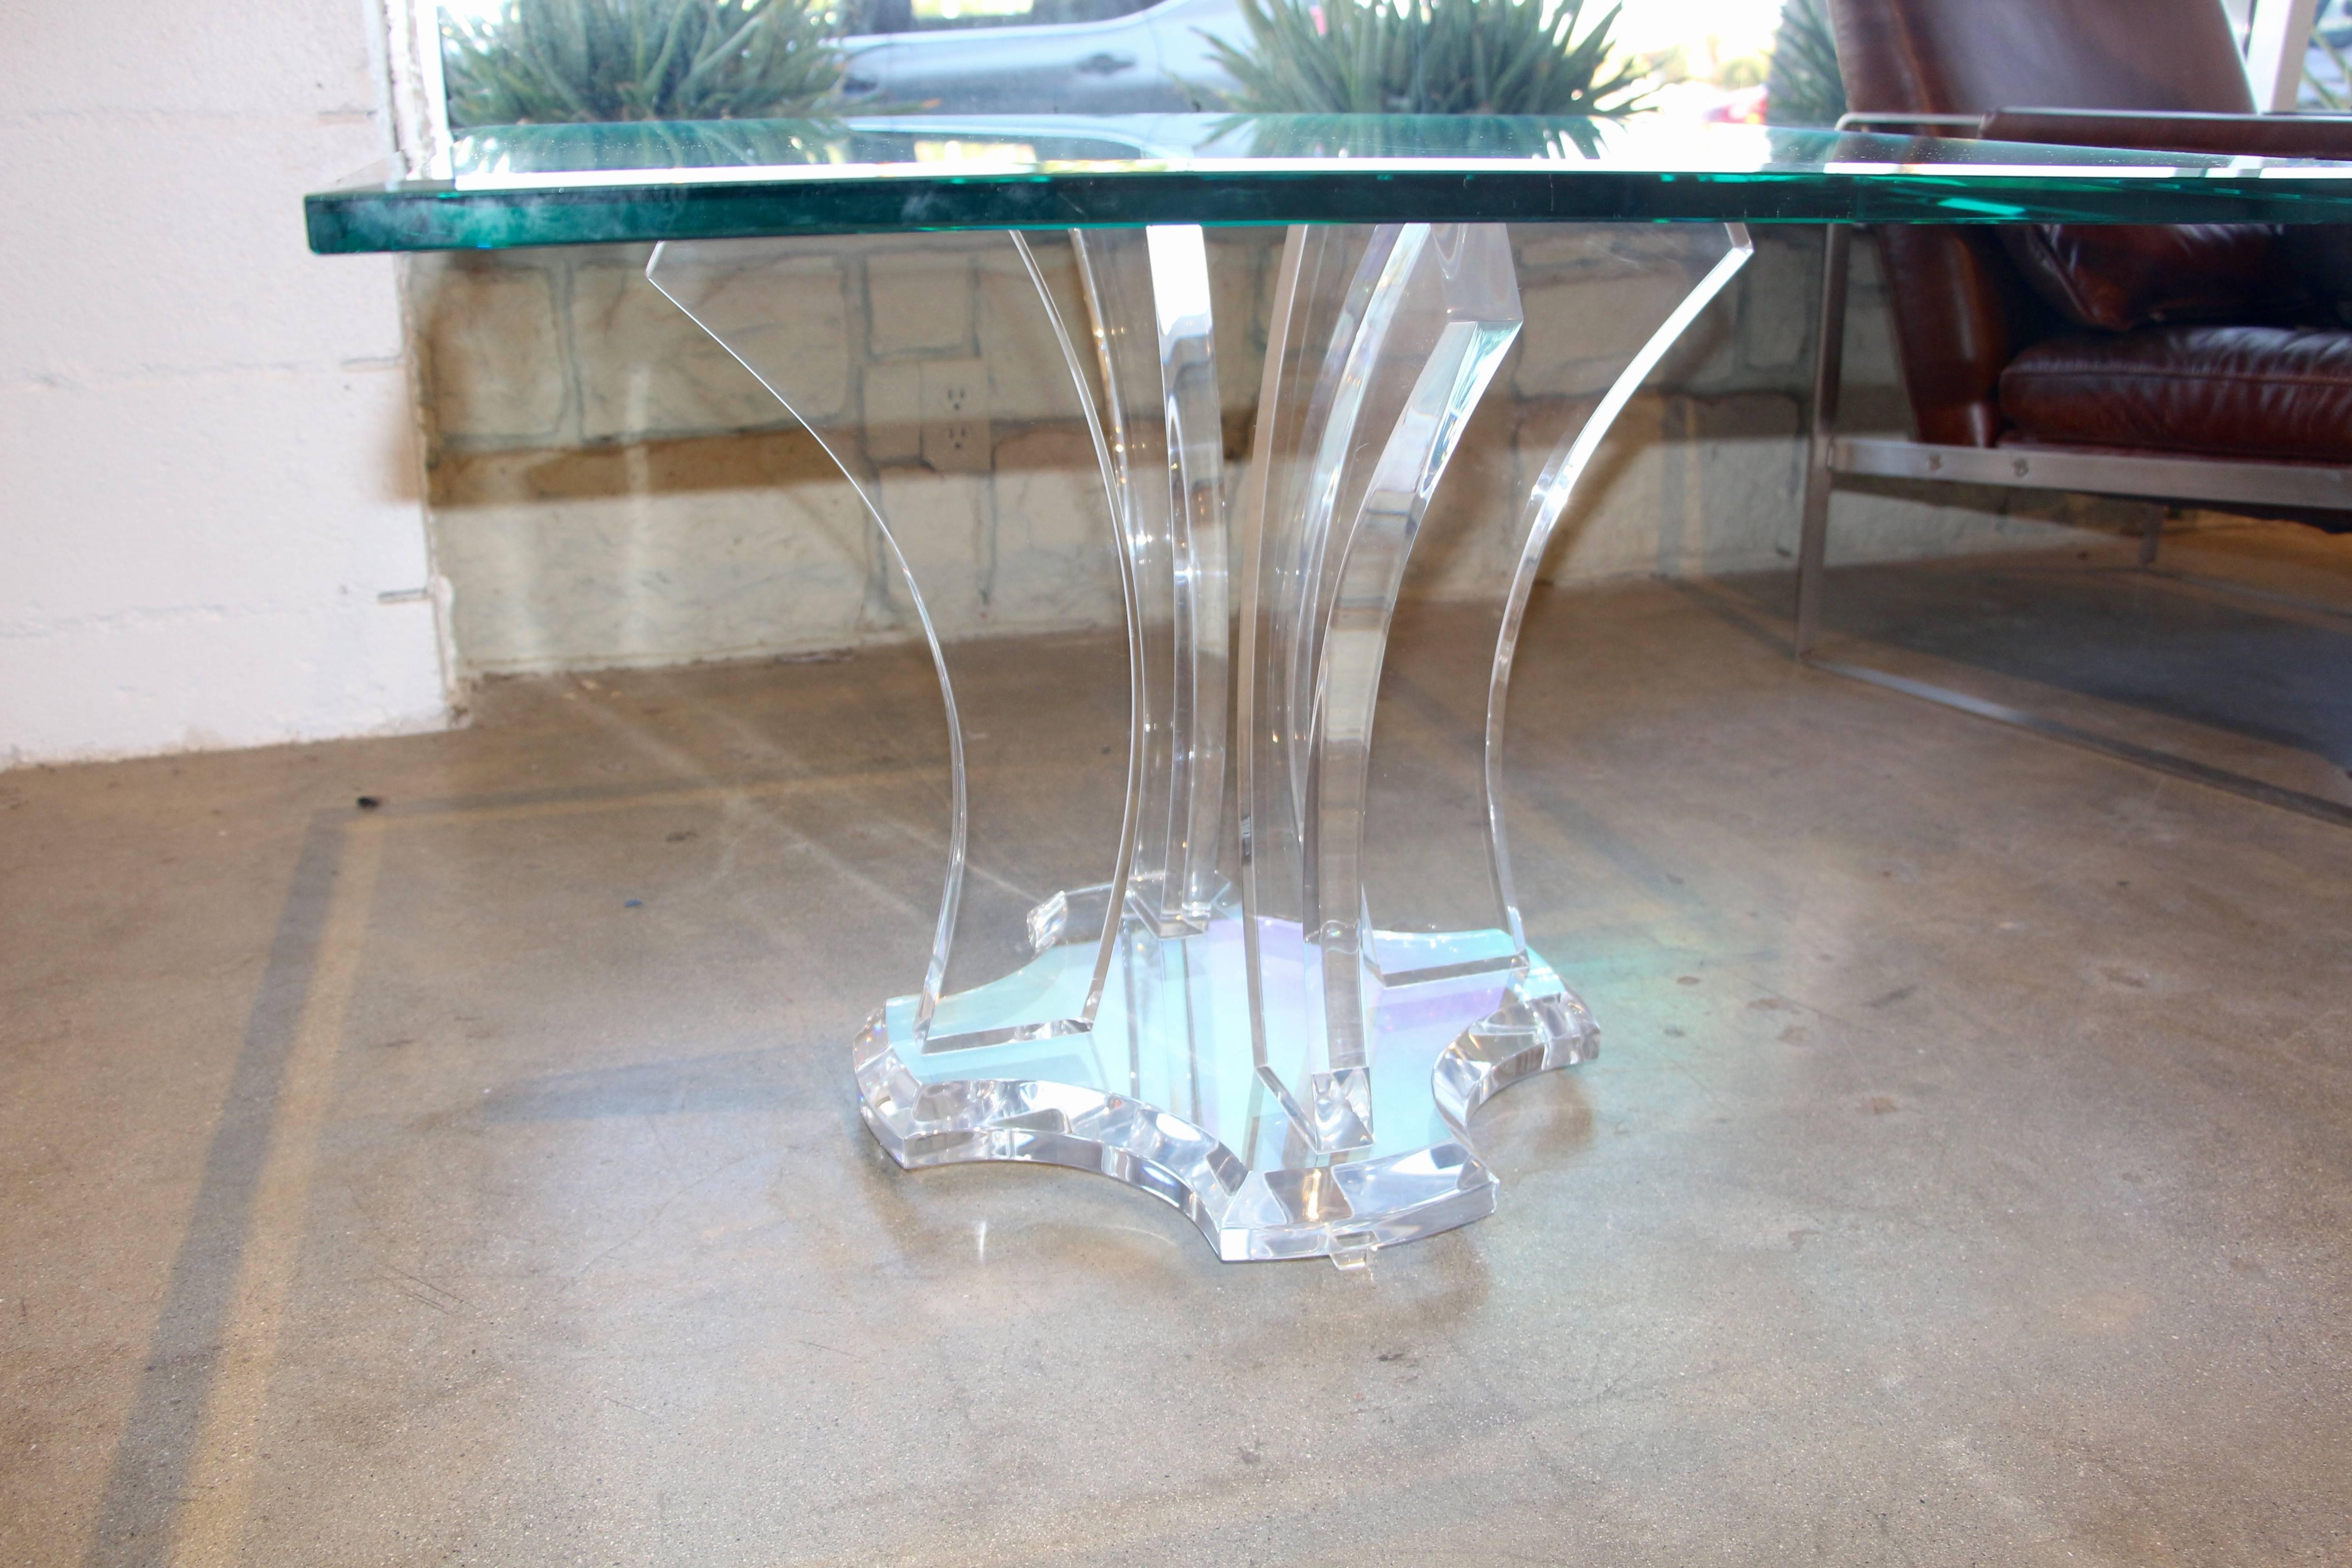 A very nice Jeffrey Bigelow designed coffee table with a glass top. Base is acrylic. A nice coffee table in good condition, with minor marks although it has been polished. Glass top has a few surface scratches and is beveled. We have shown the table